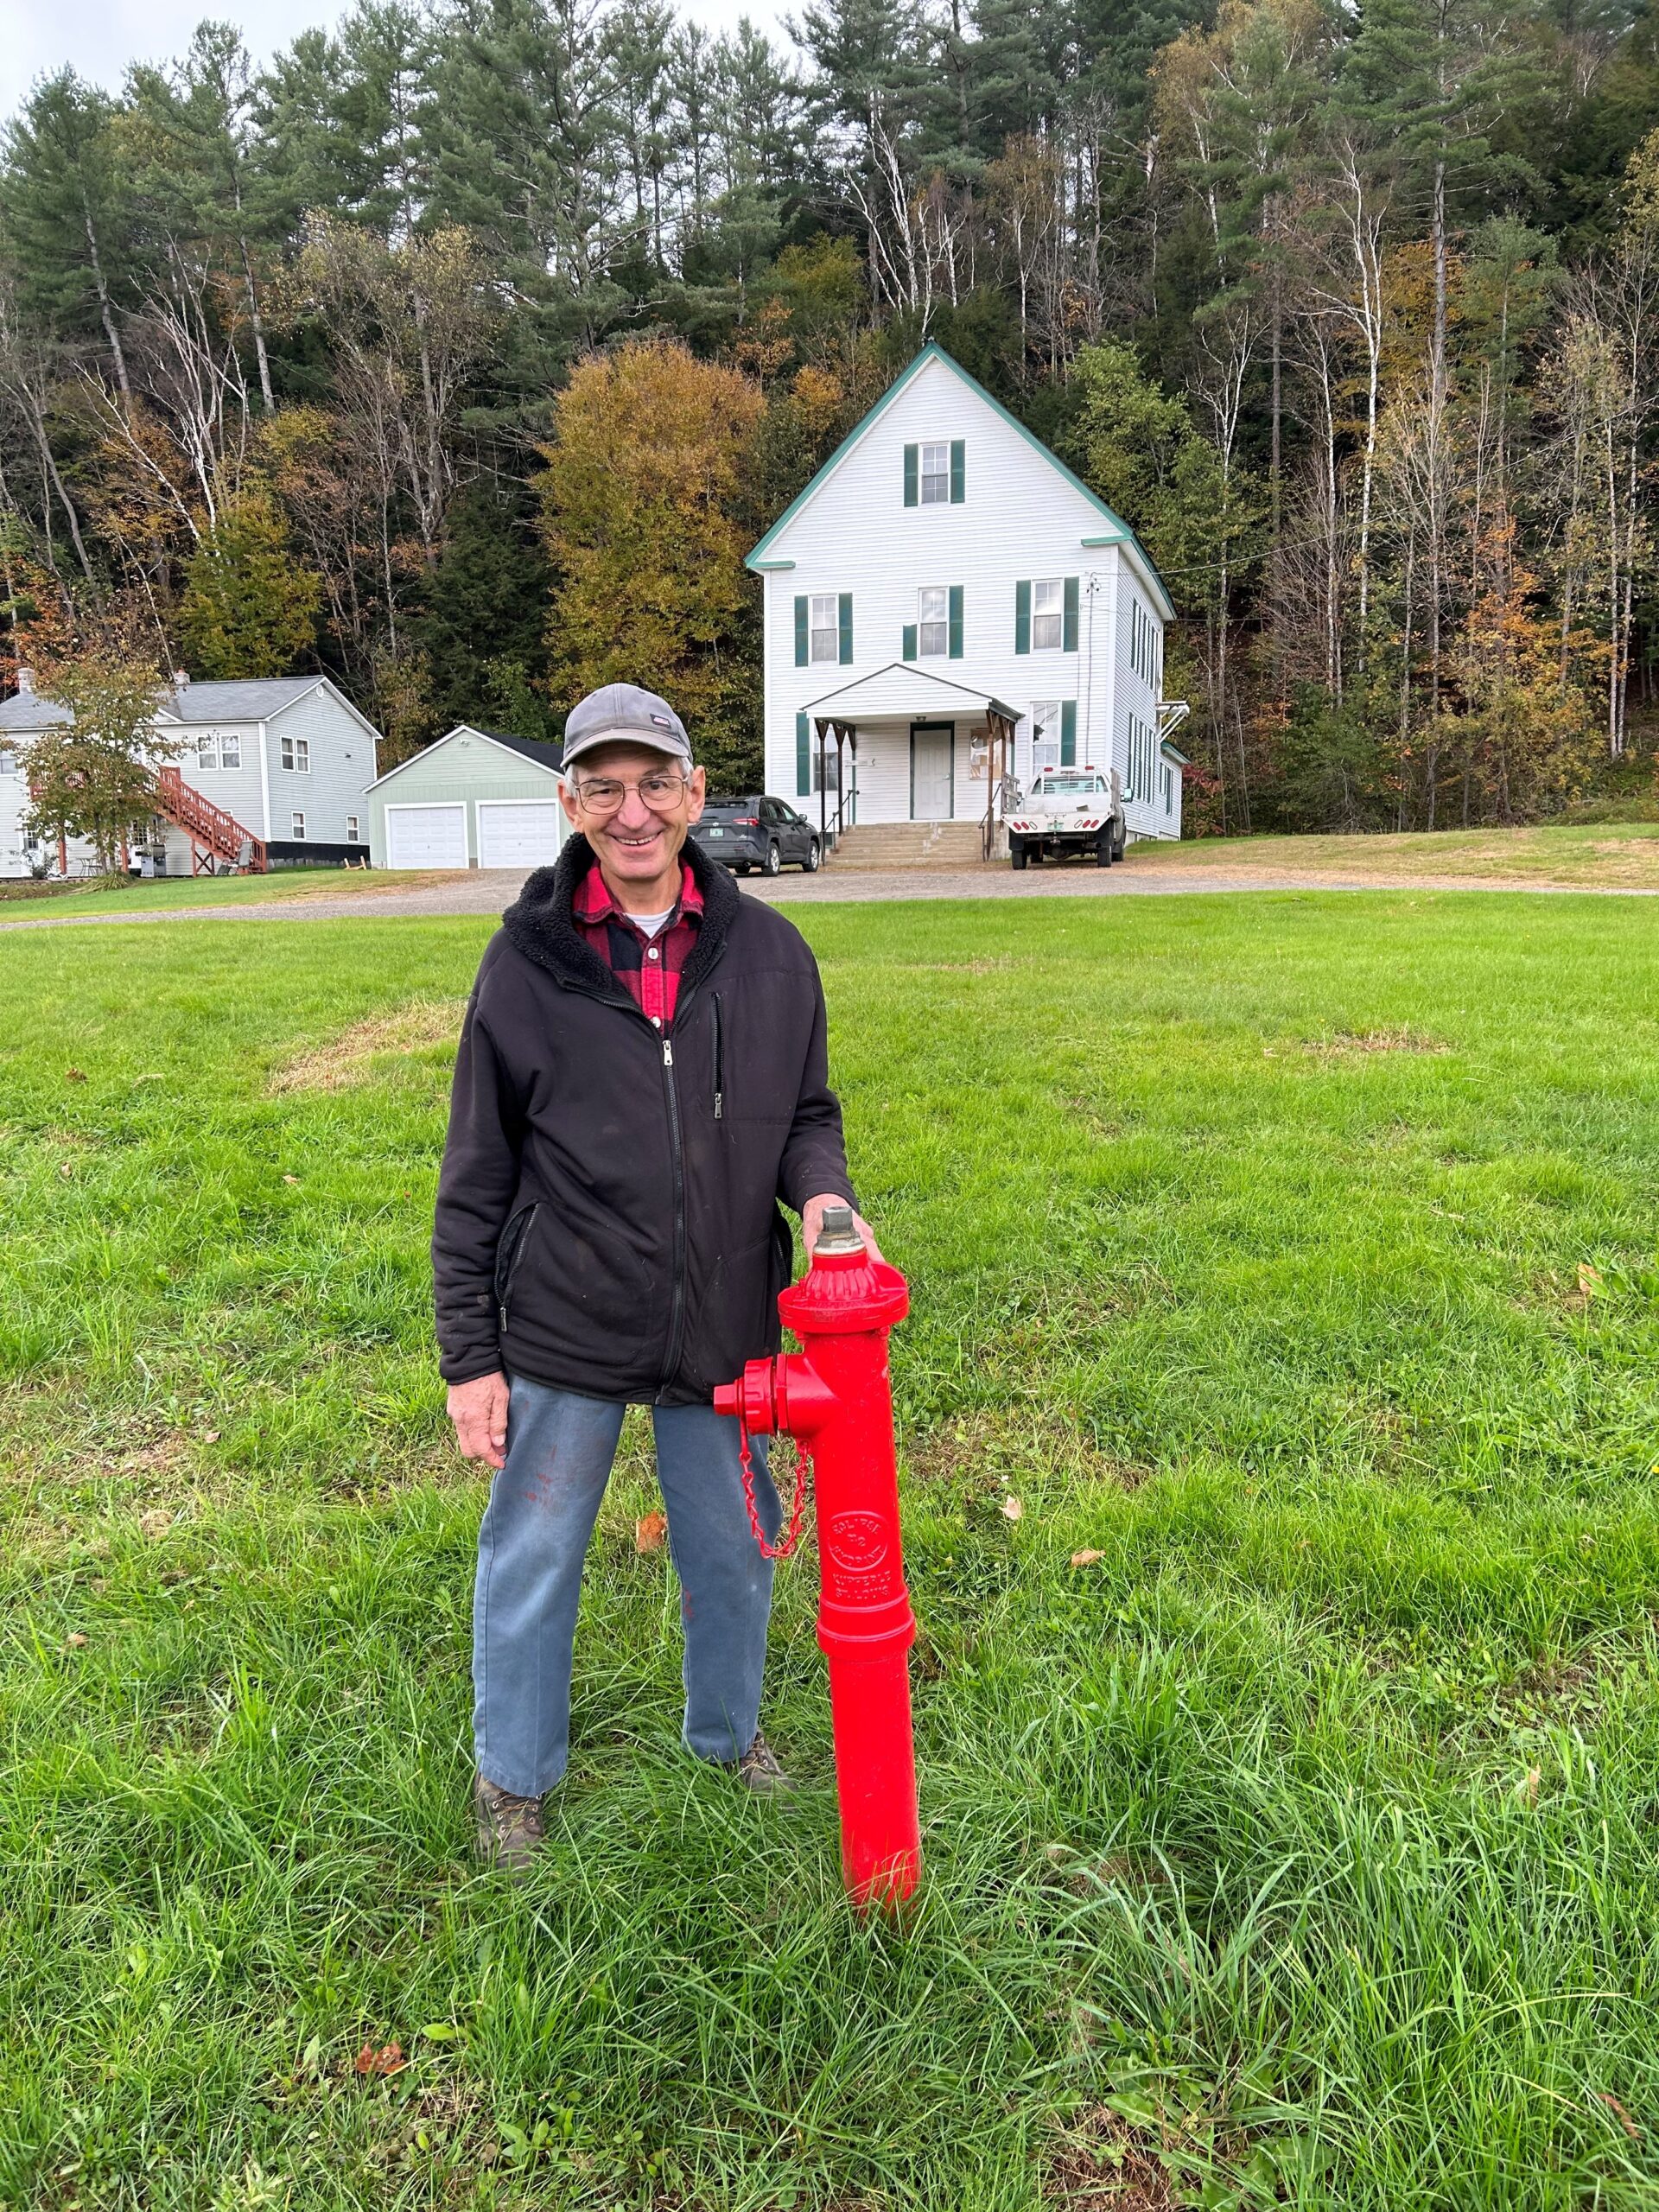 A man stands on a lawn next to a red hydrant